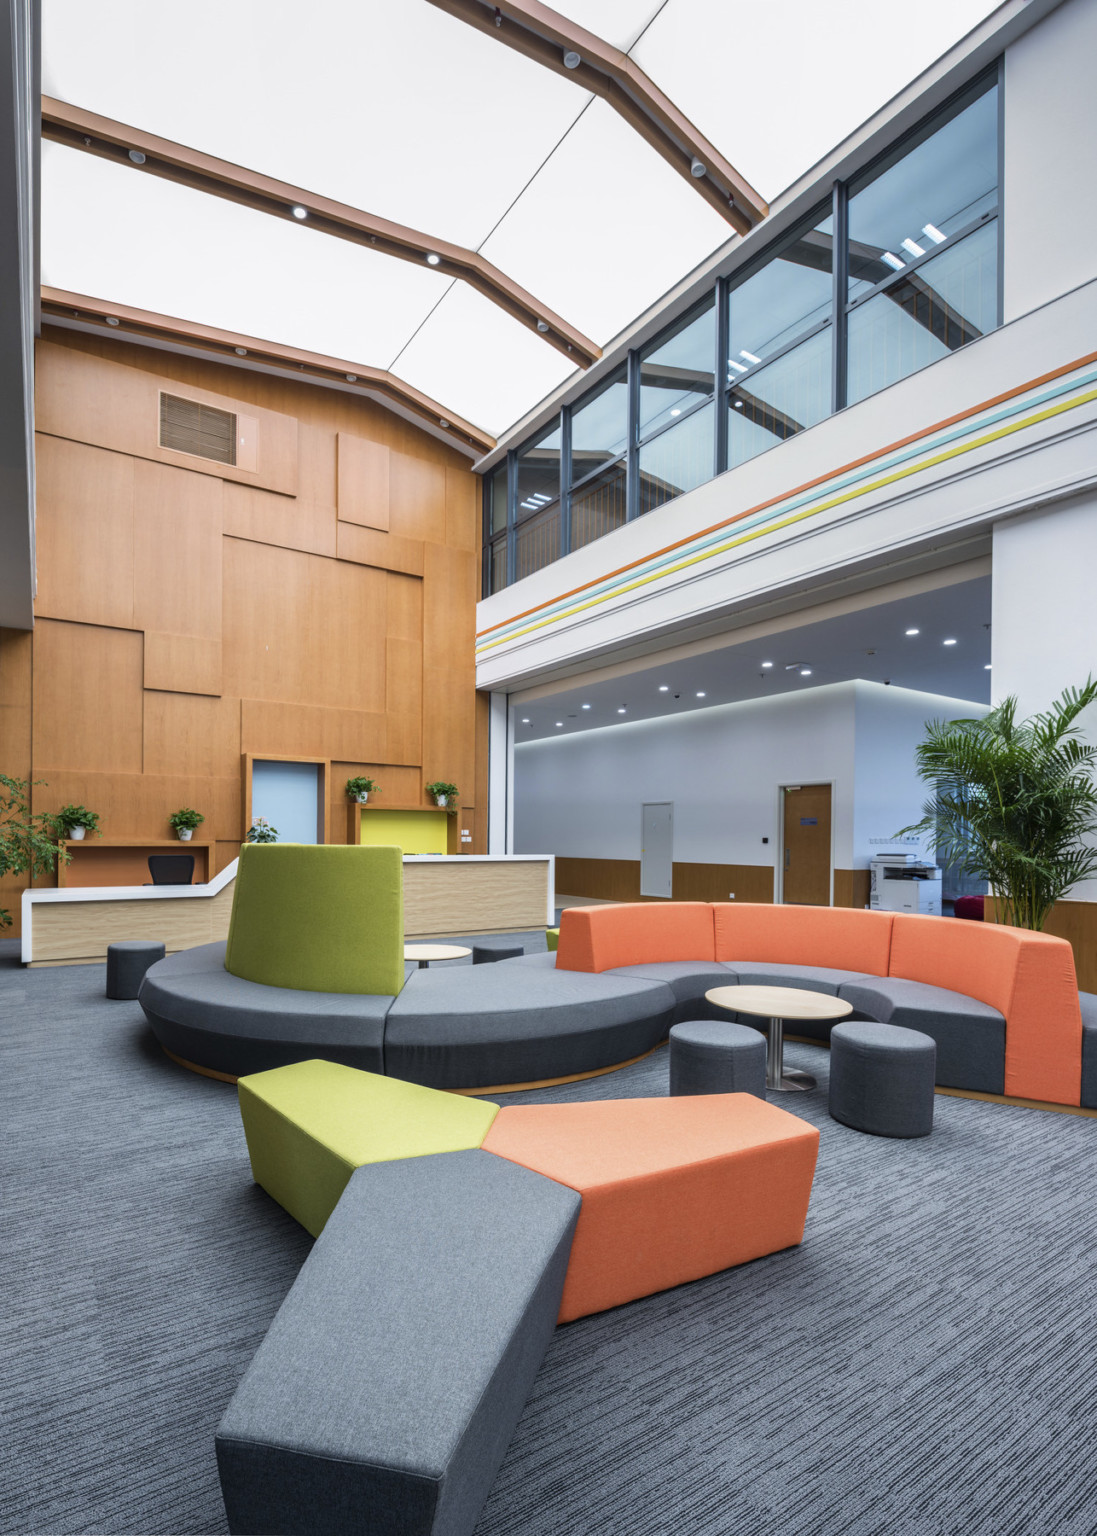 Double height atrium with ergonomic seating area. A multicolor curved couch with matching benches. Right, a 2nd floor walkway